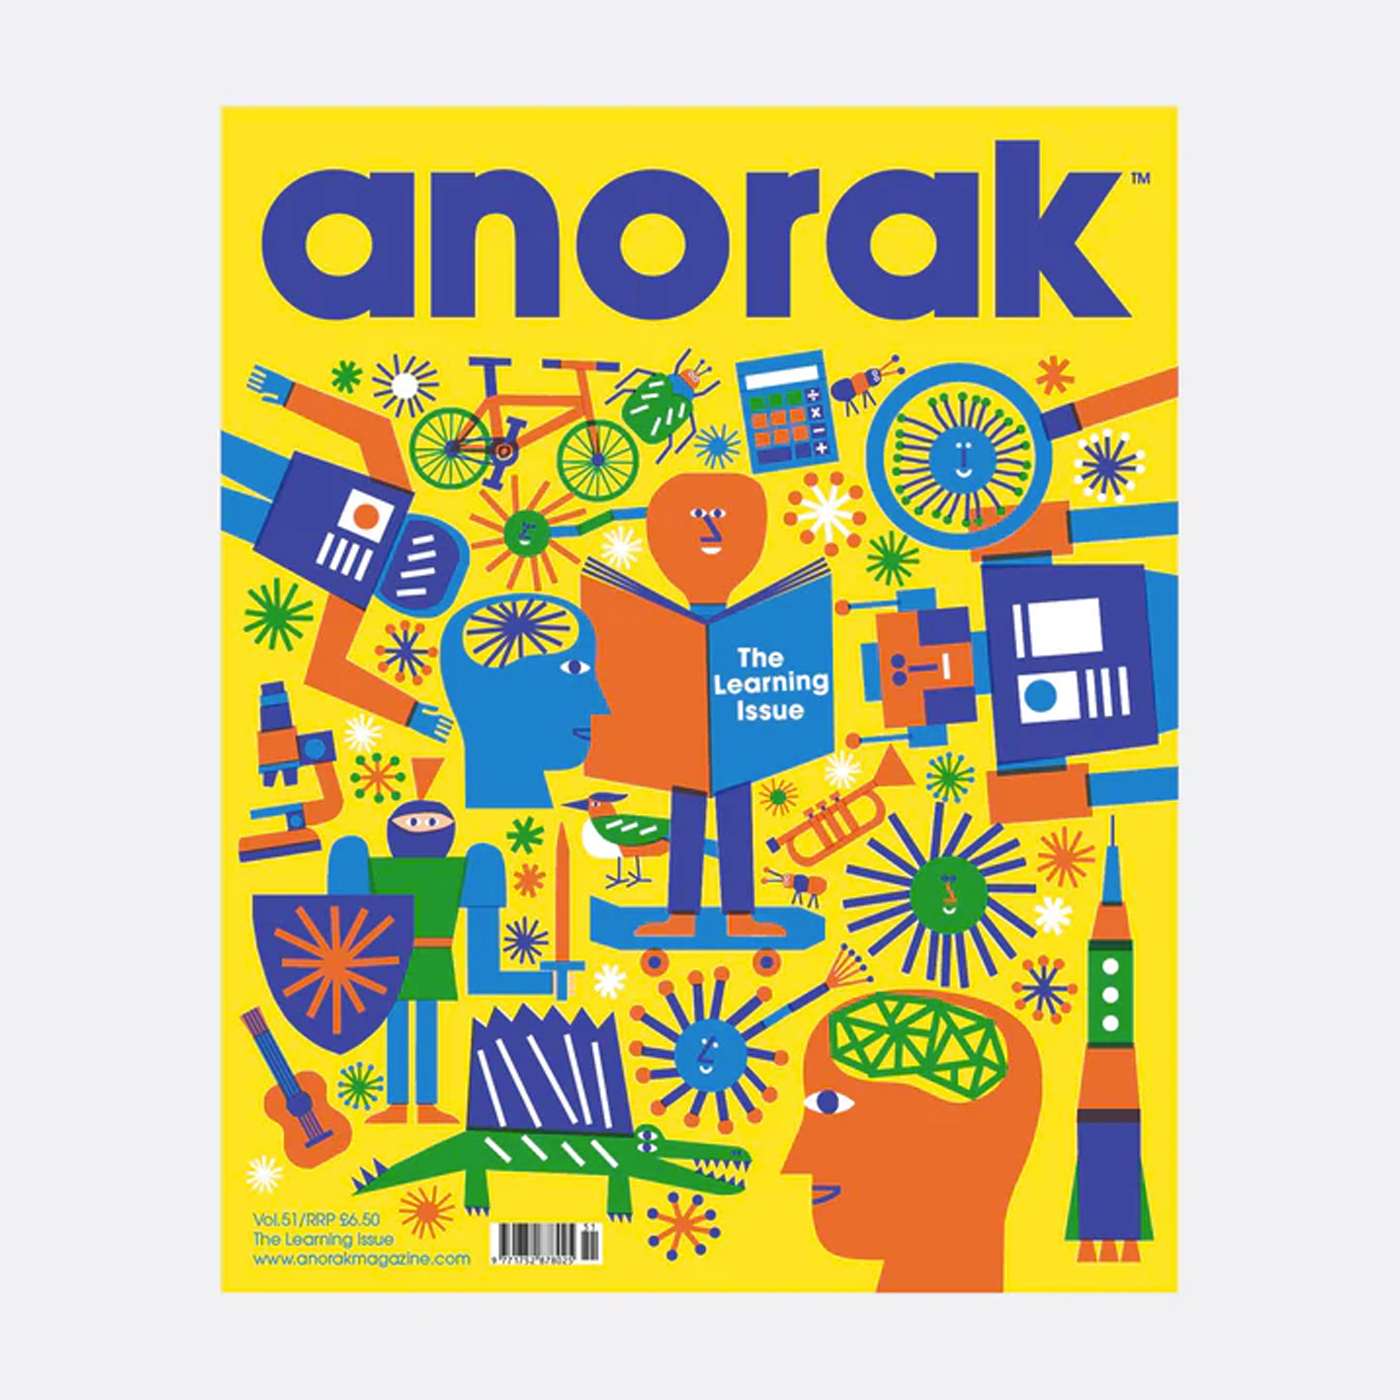 ANORAK Anorak - The Learning Issue Vol.51